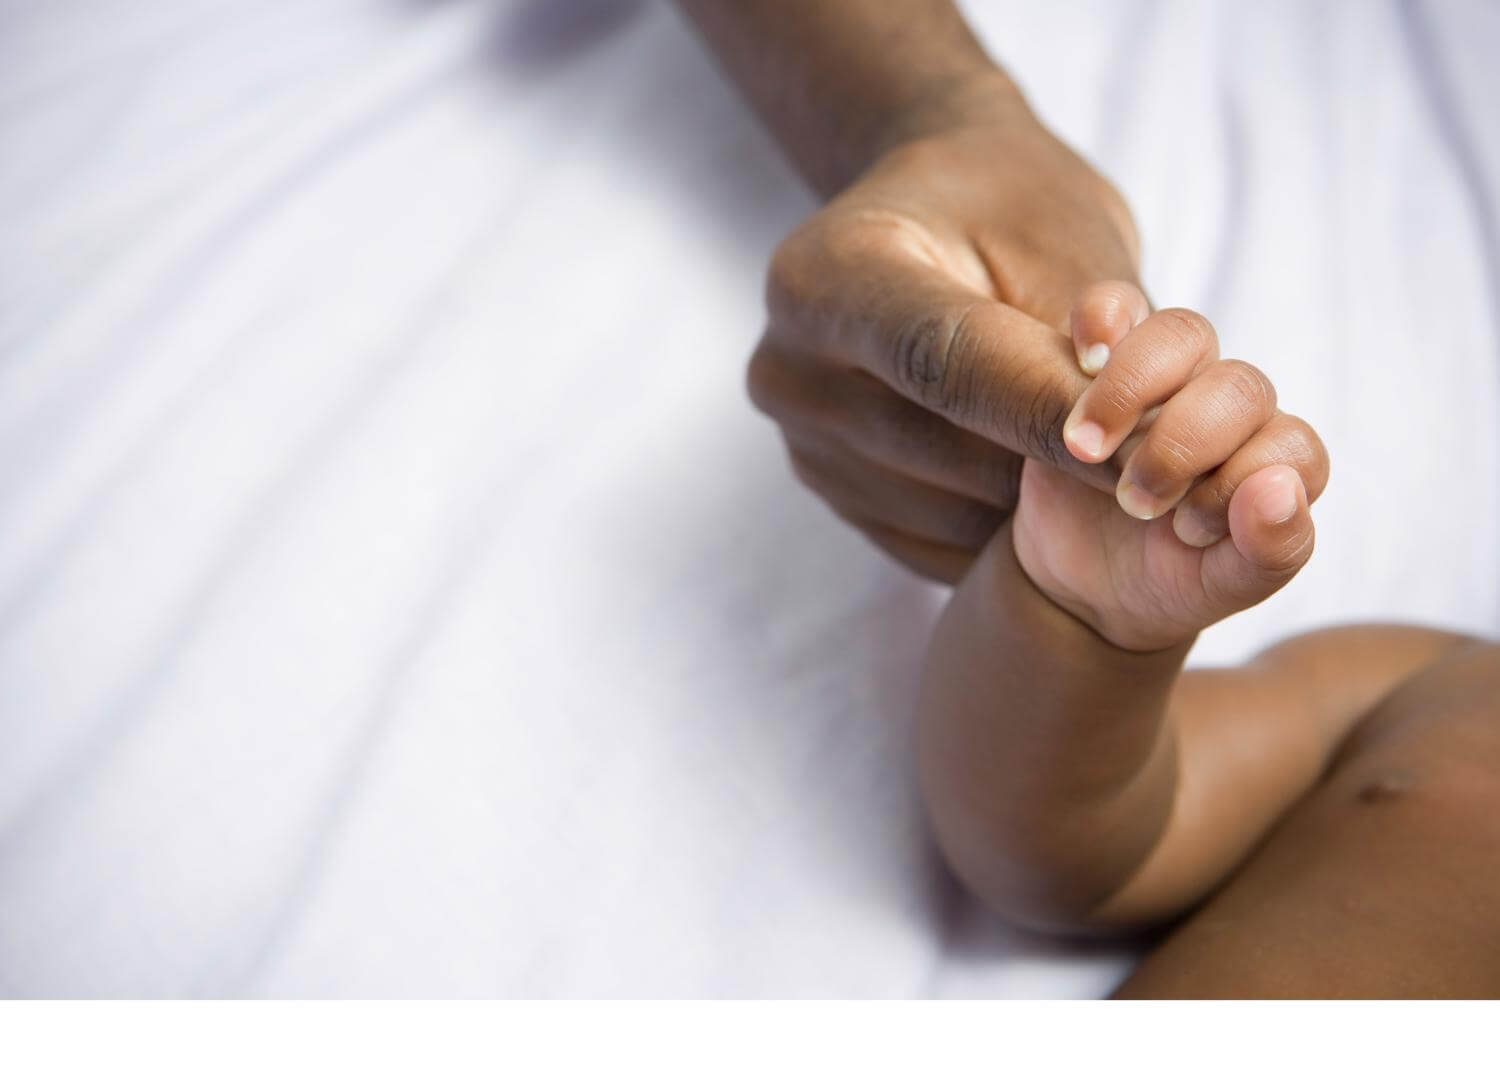 Infant hand holding an adult finger, both with brown skin